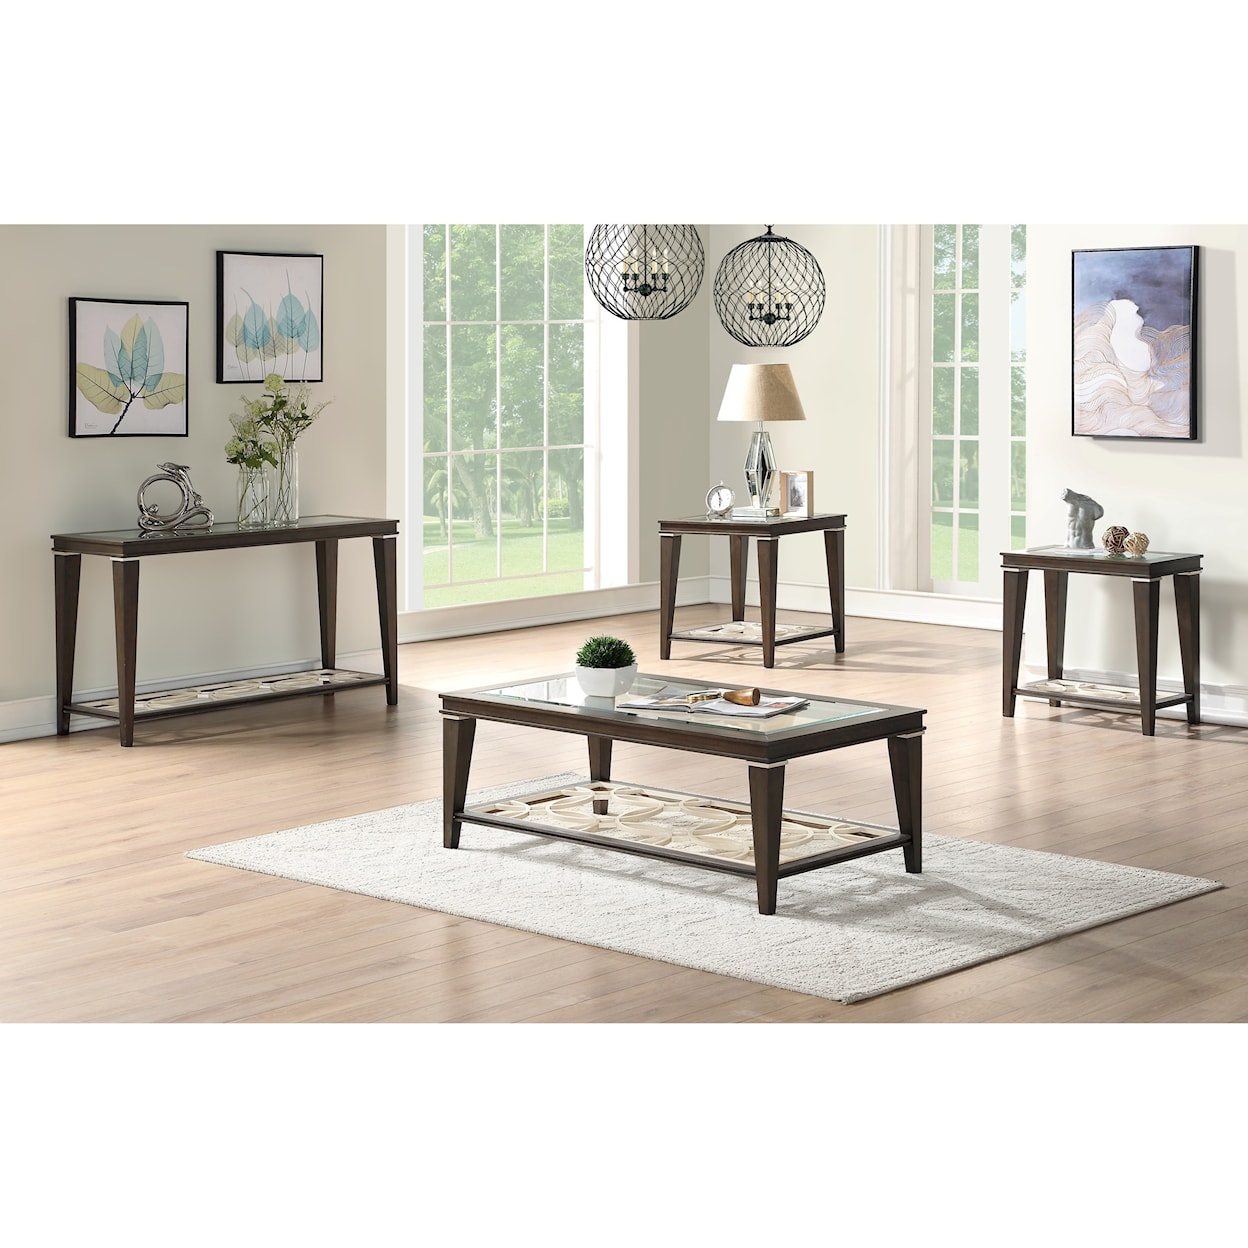 Acme Furniture Peregrine Side Table